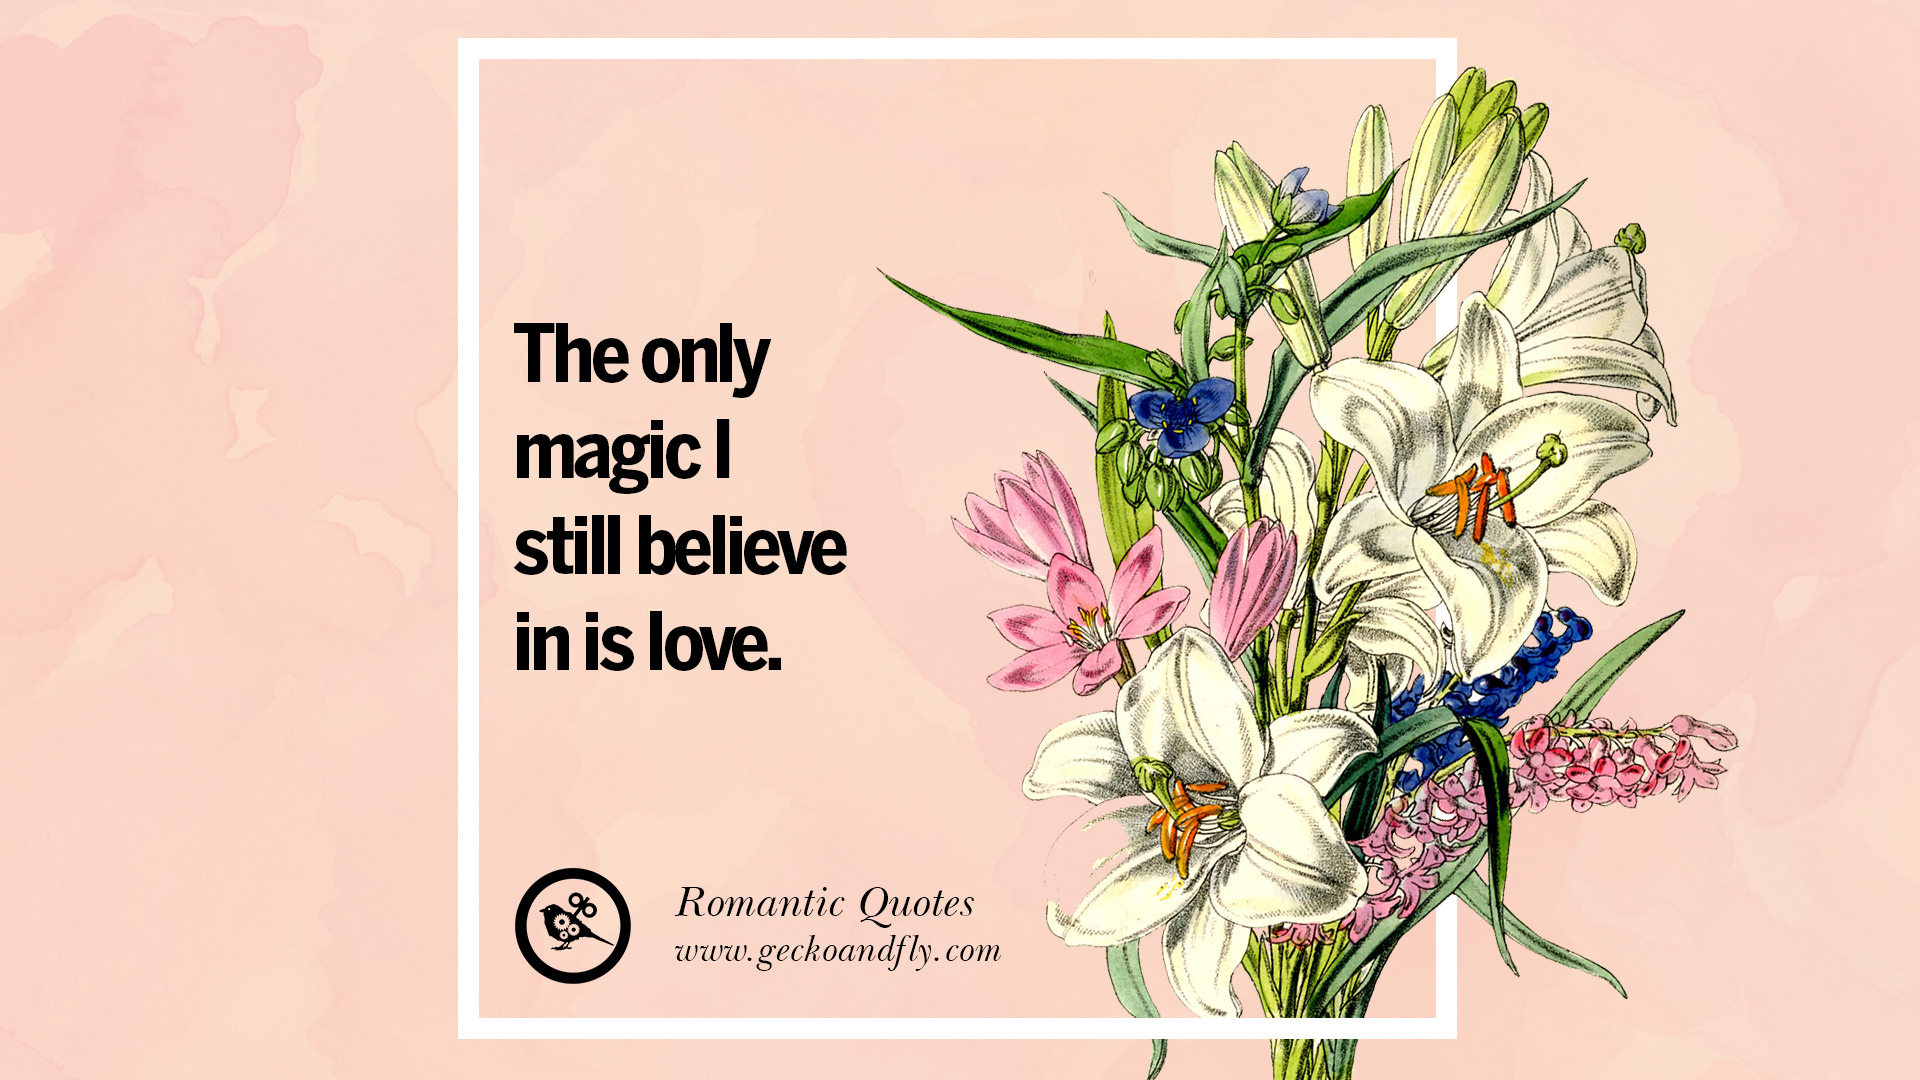 36 Lovely Romantic Quotes And Wedding Vows For An Inspiring Toast Or Speech